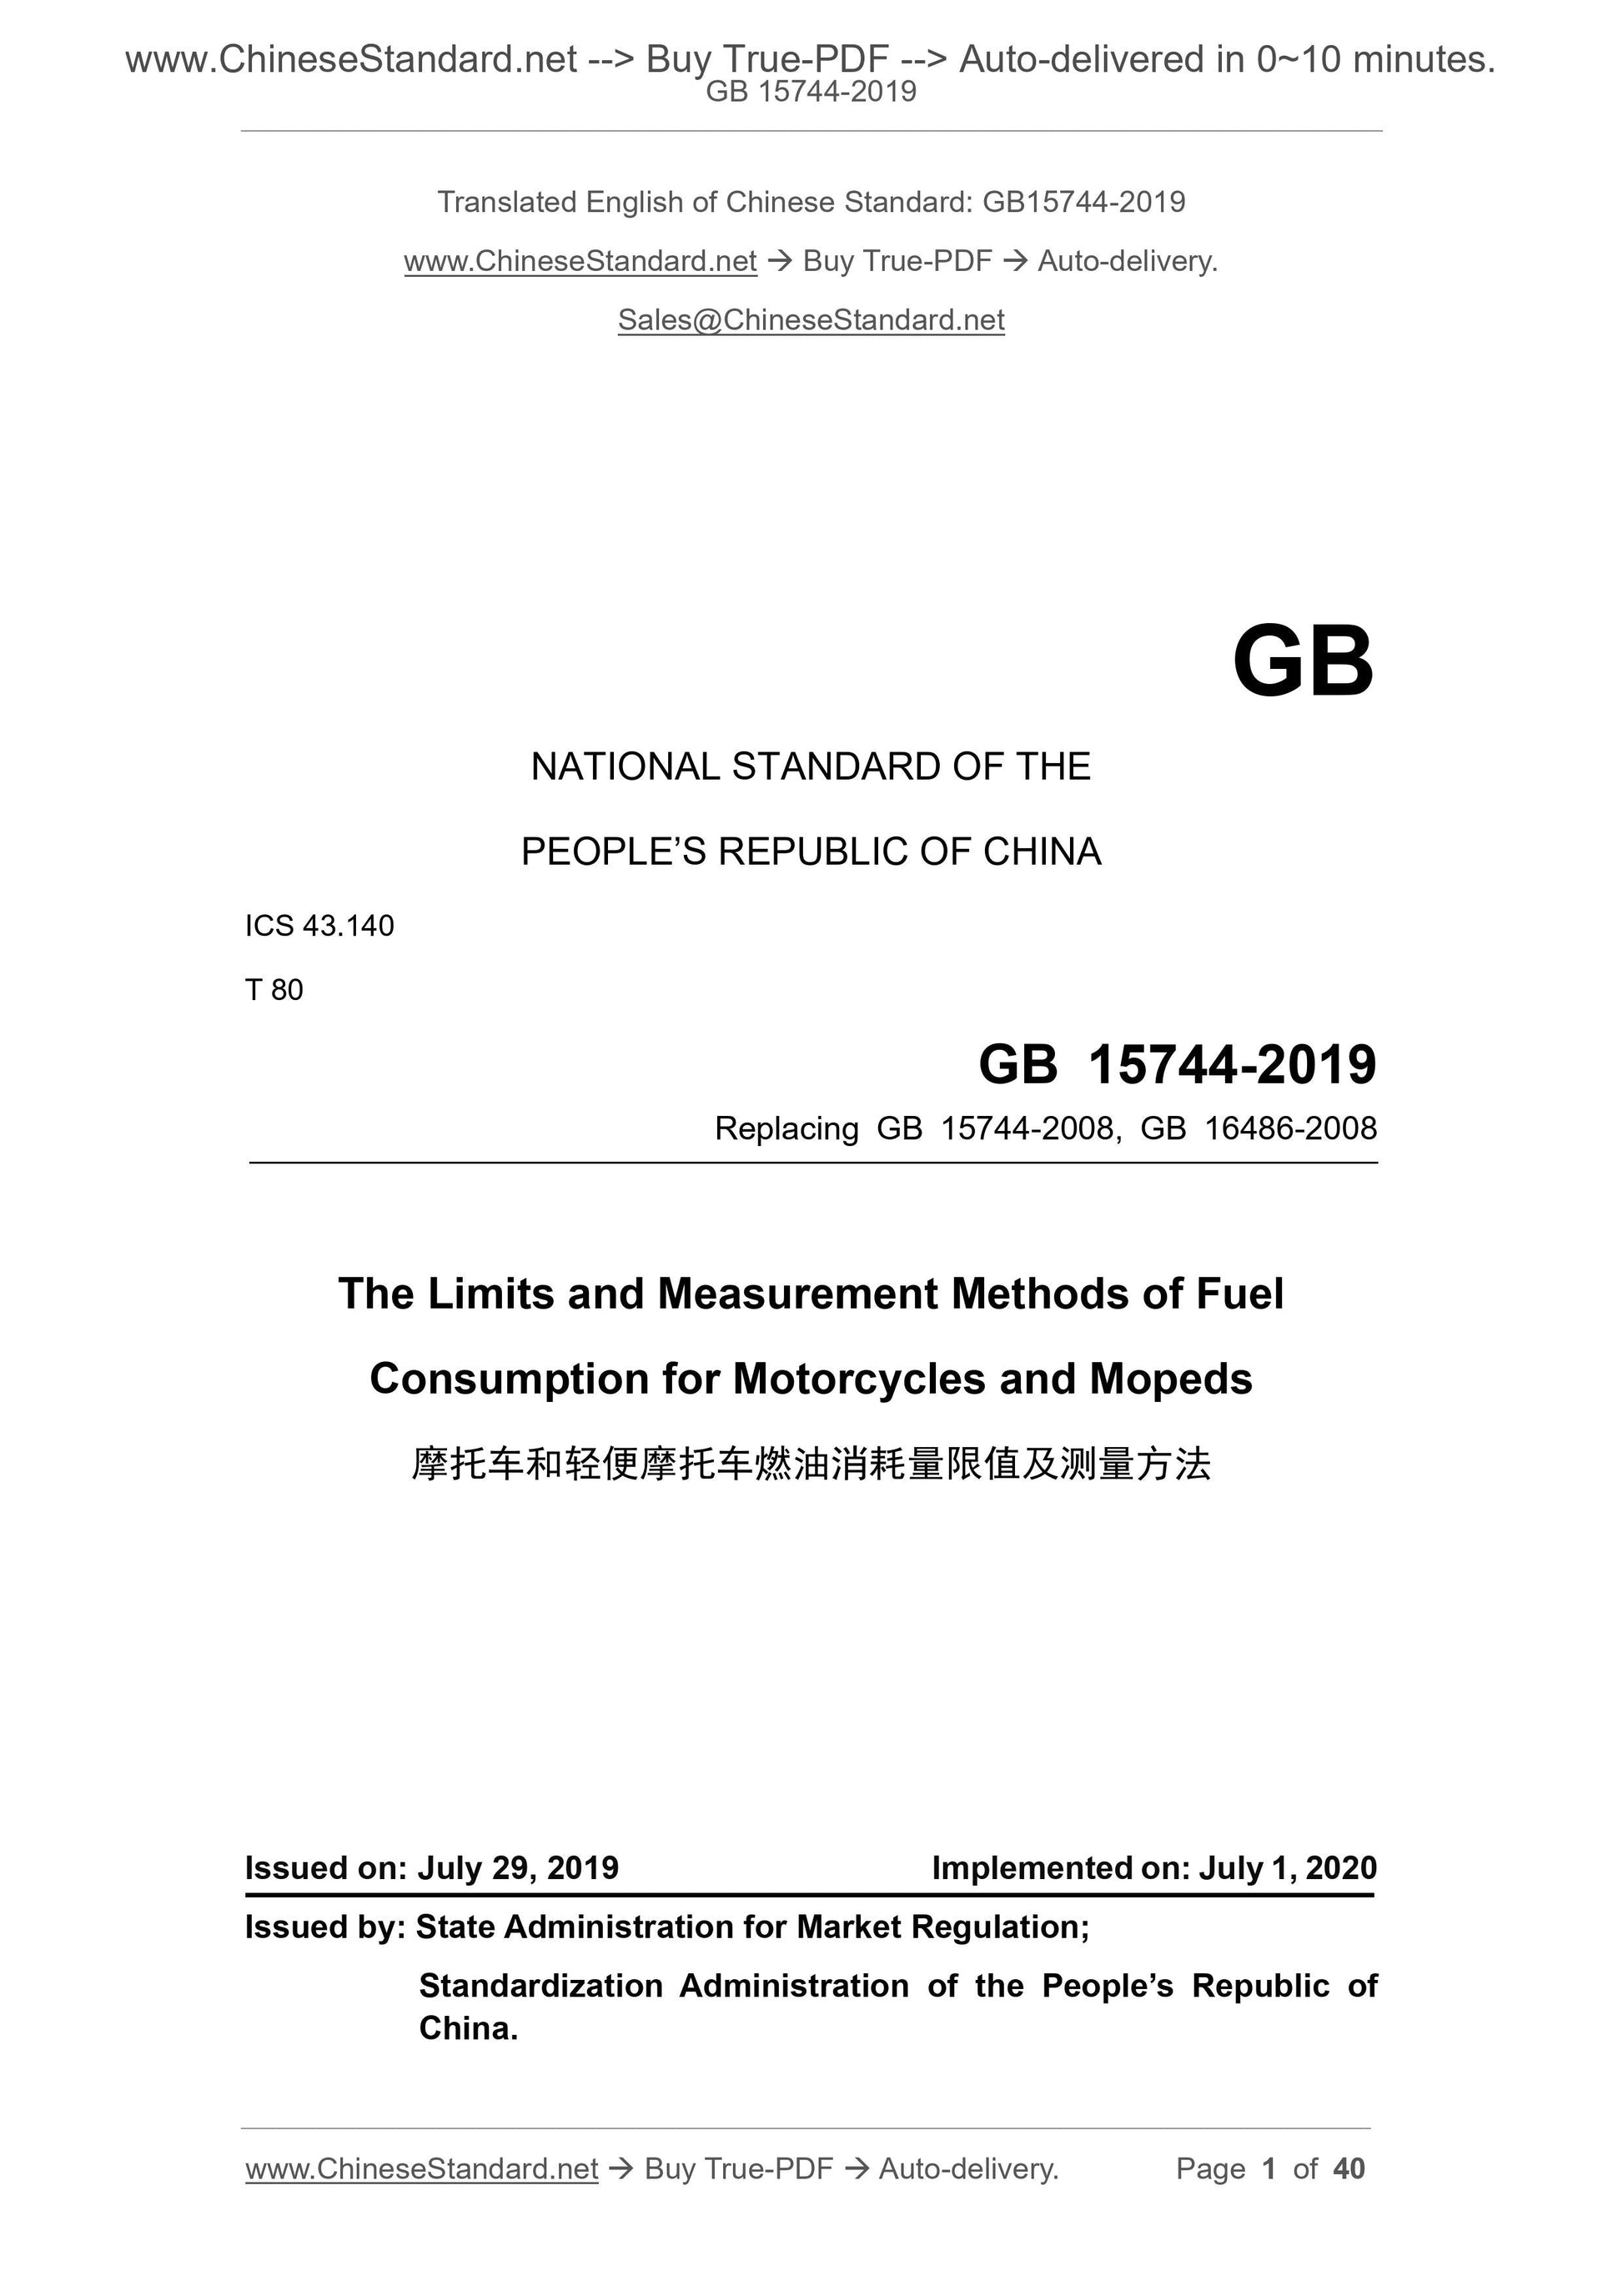 GB 15744-2019 Page 1